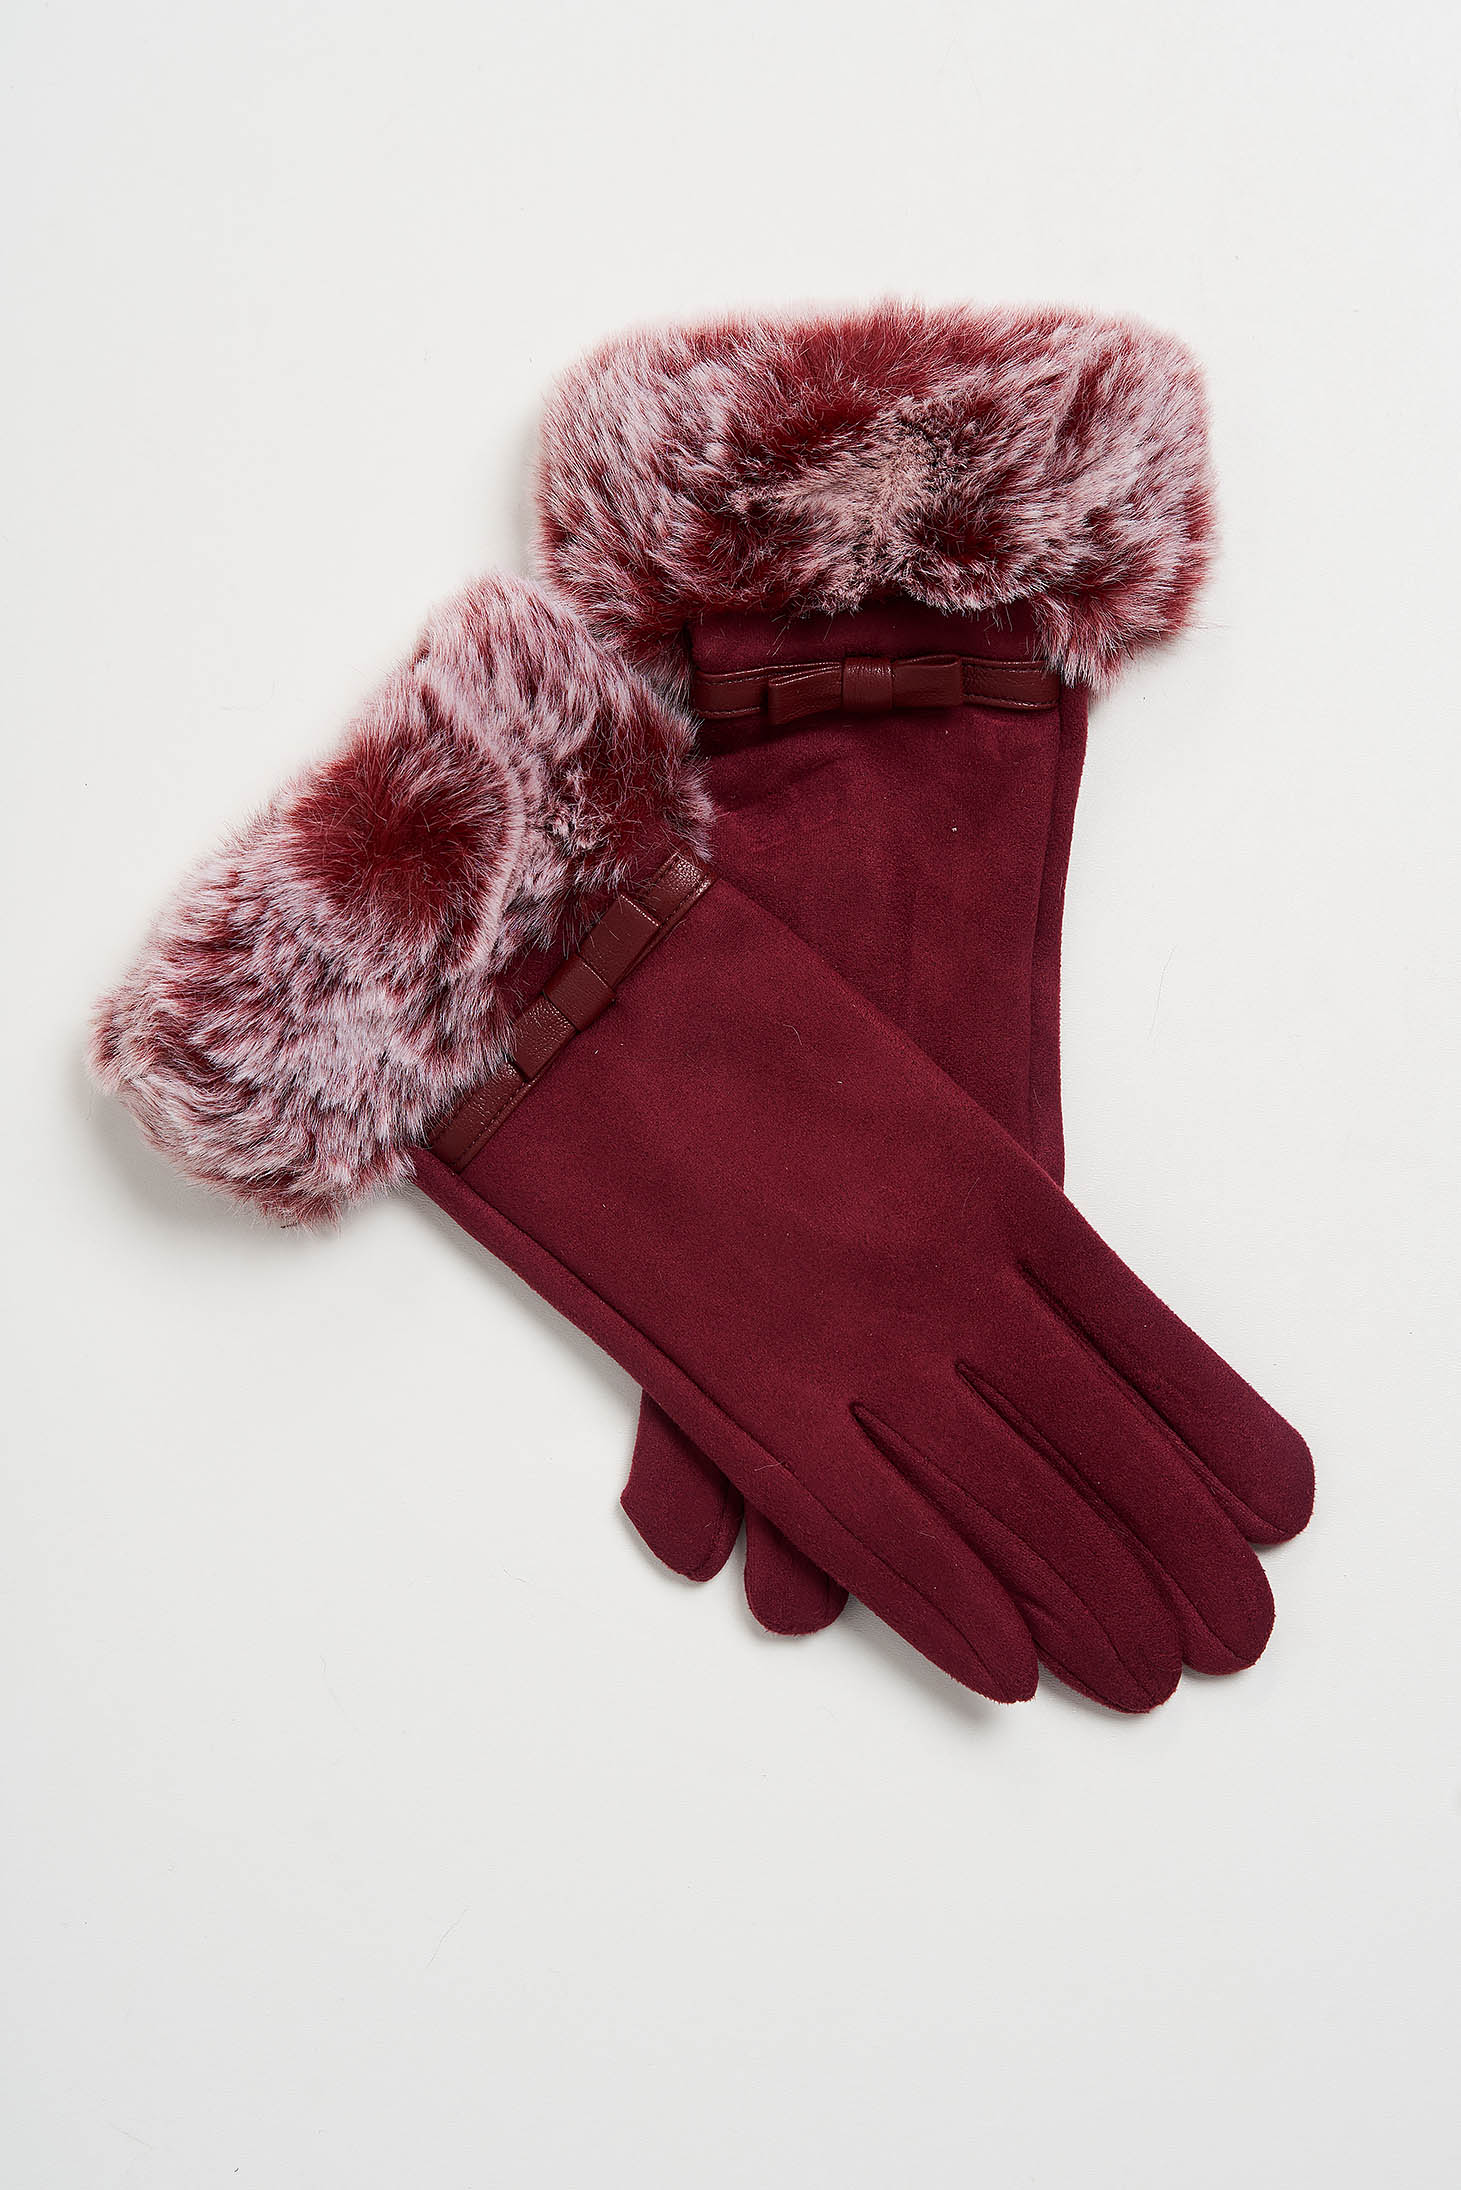 Darkred gloves from ecological leather with faux fur accessory